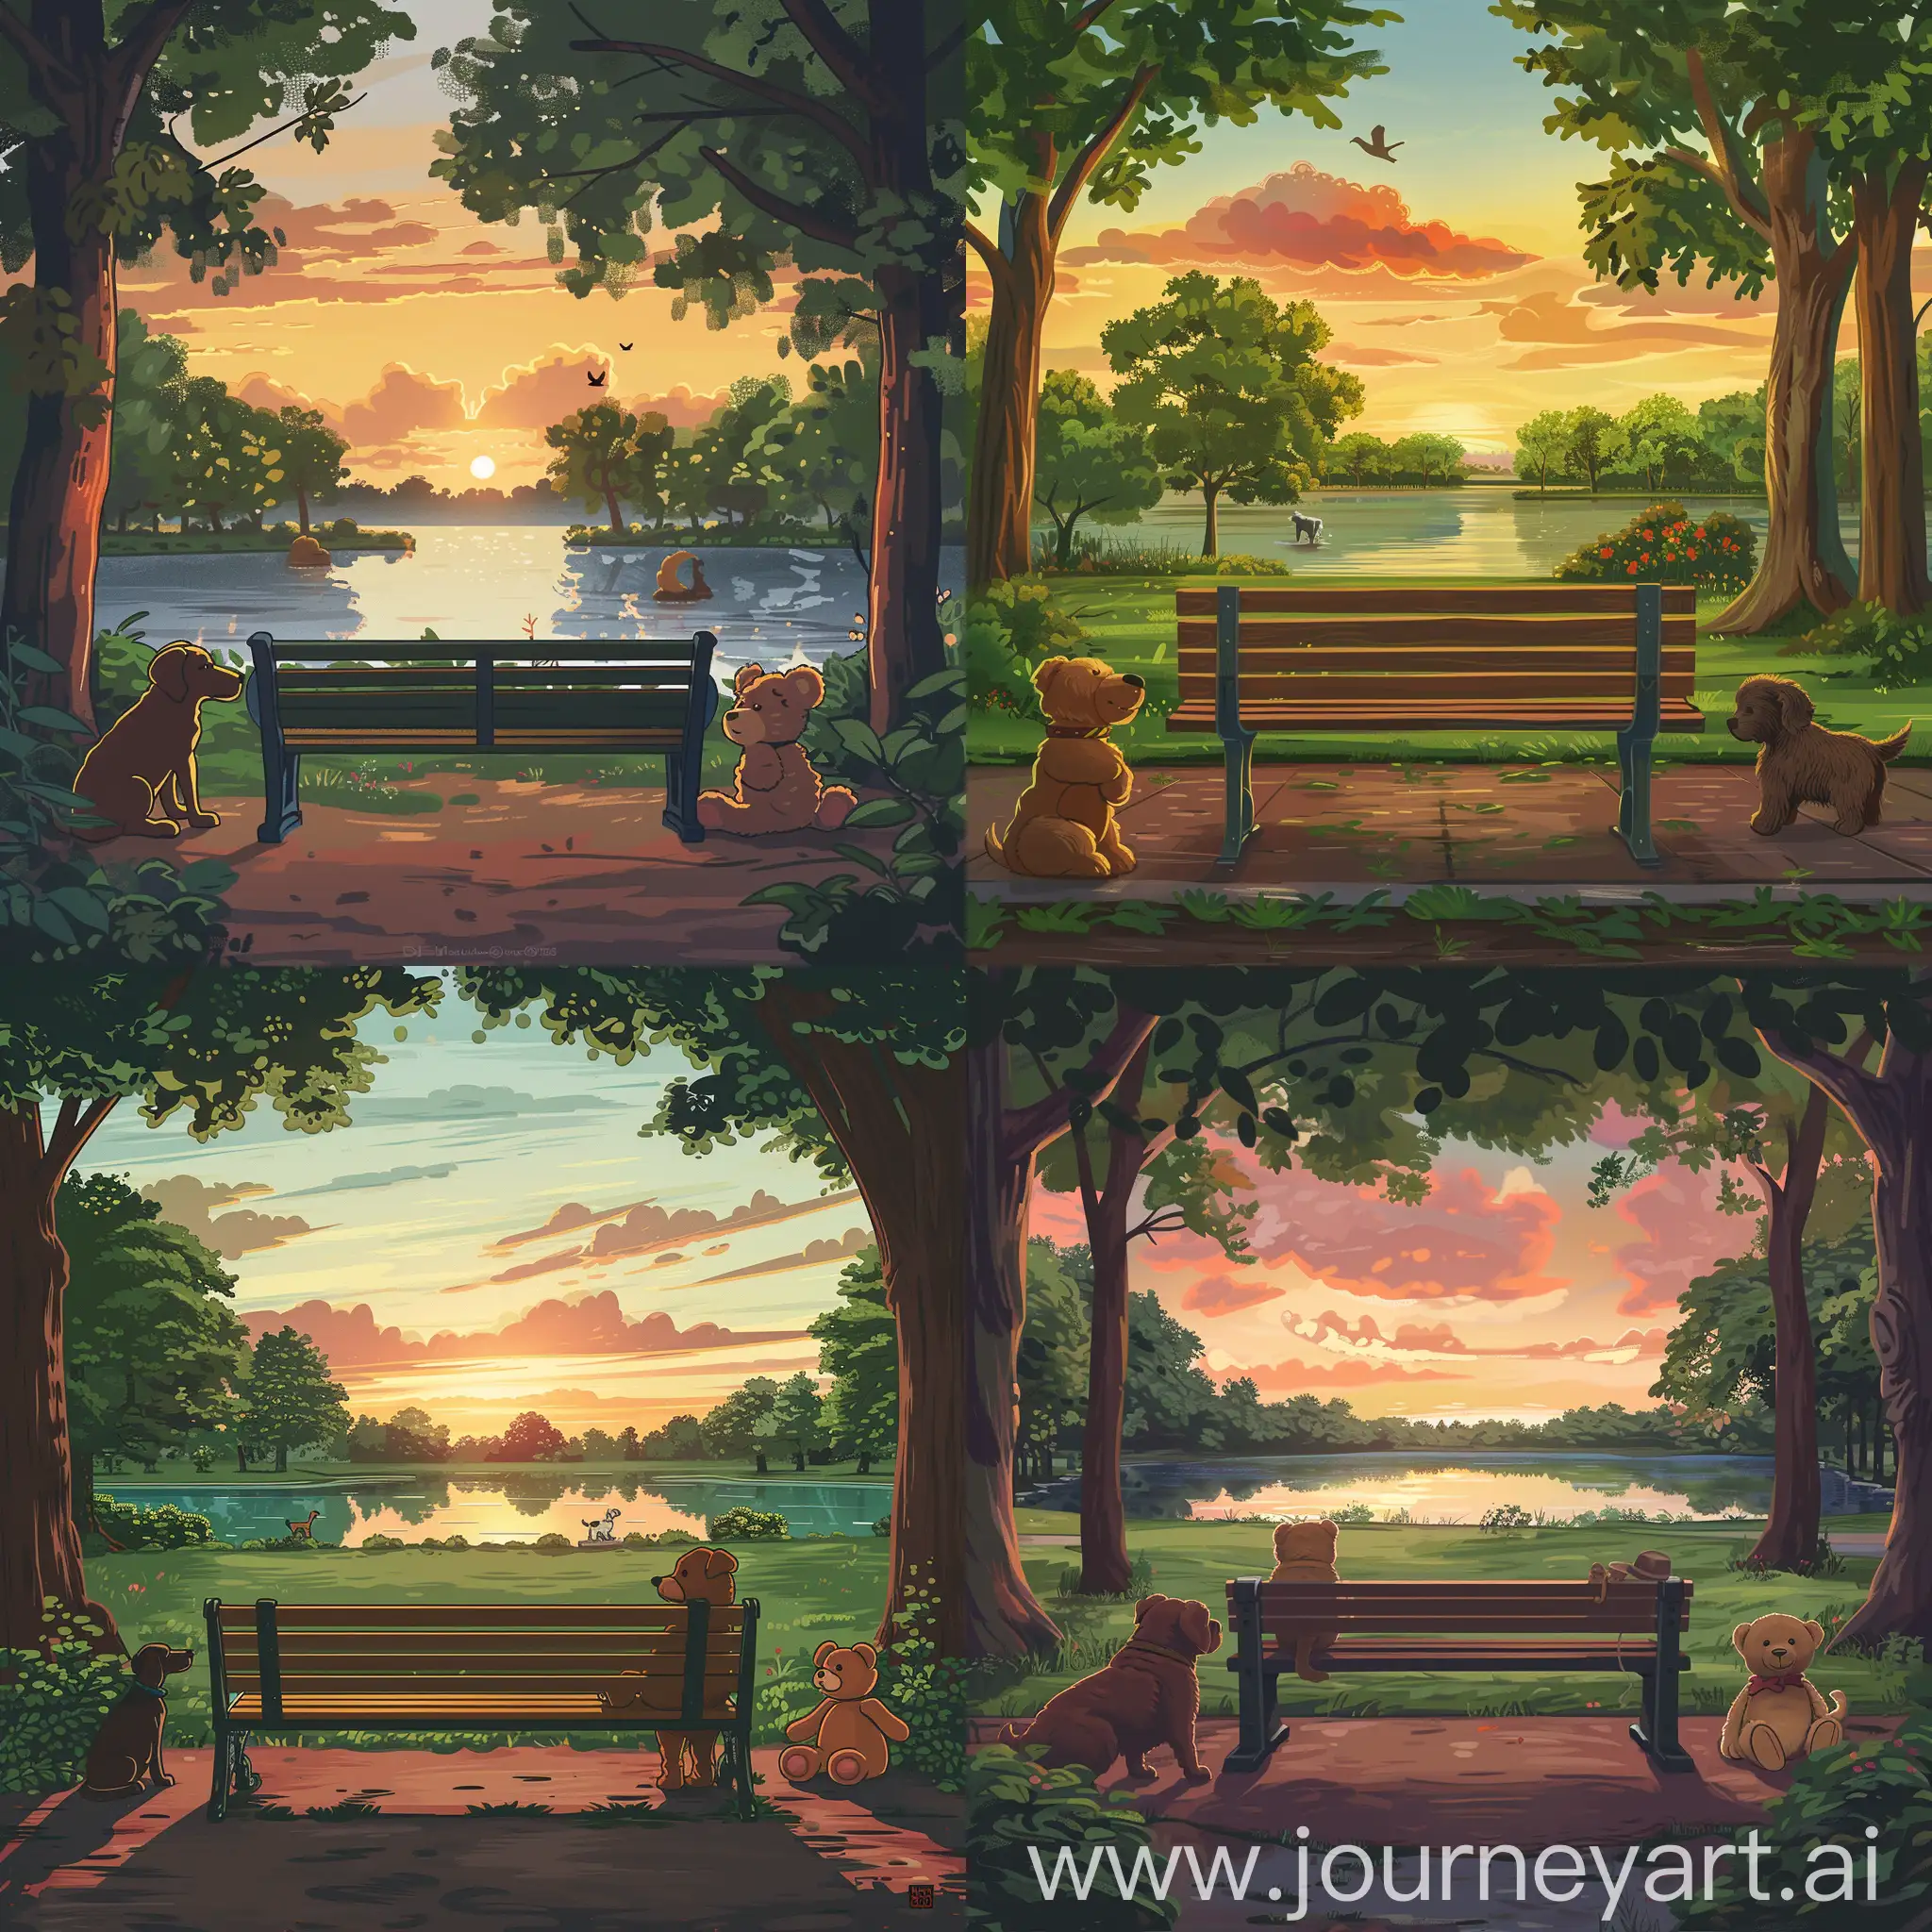 bench in a park. with lake in the outside. sunset time. trees and greens. dog on one side and teddy on the other side of the bench. keep it realistic but in illustration format.